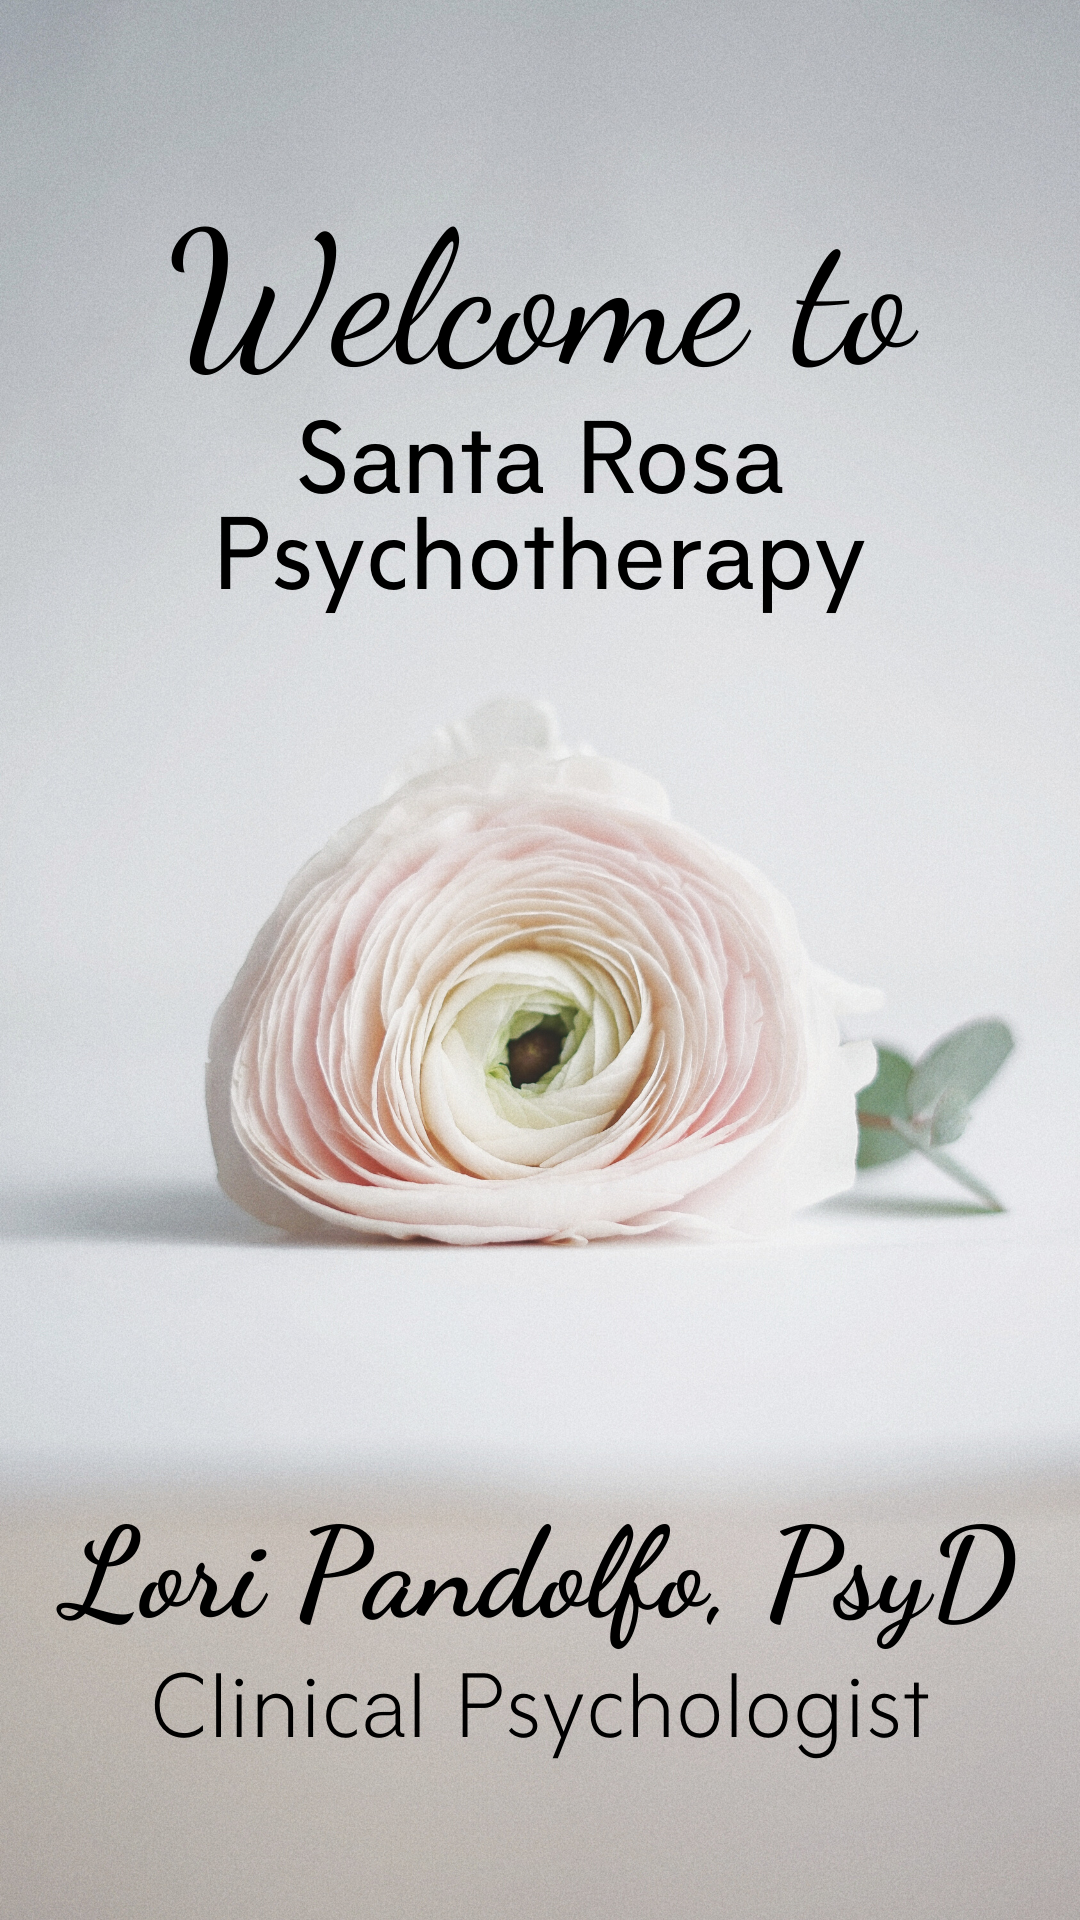 mobile optimized image that reads: Santa Rosa Psychotherapy. Lori Pandolfo, Psy.D. Clinical Psychologist